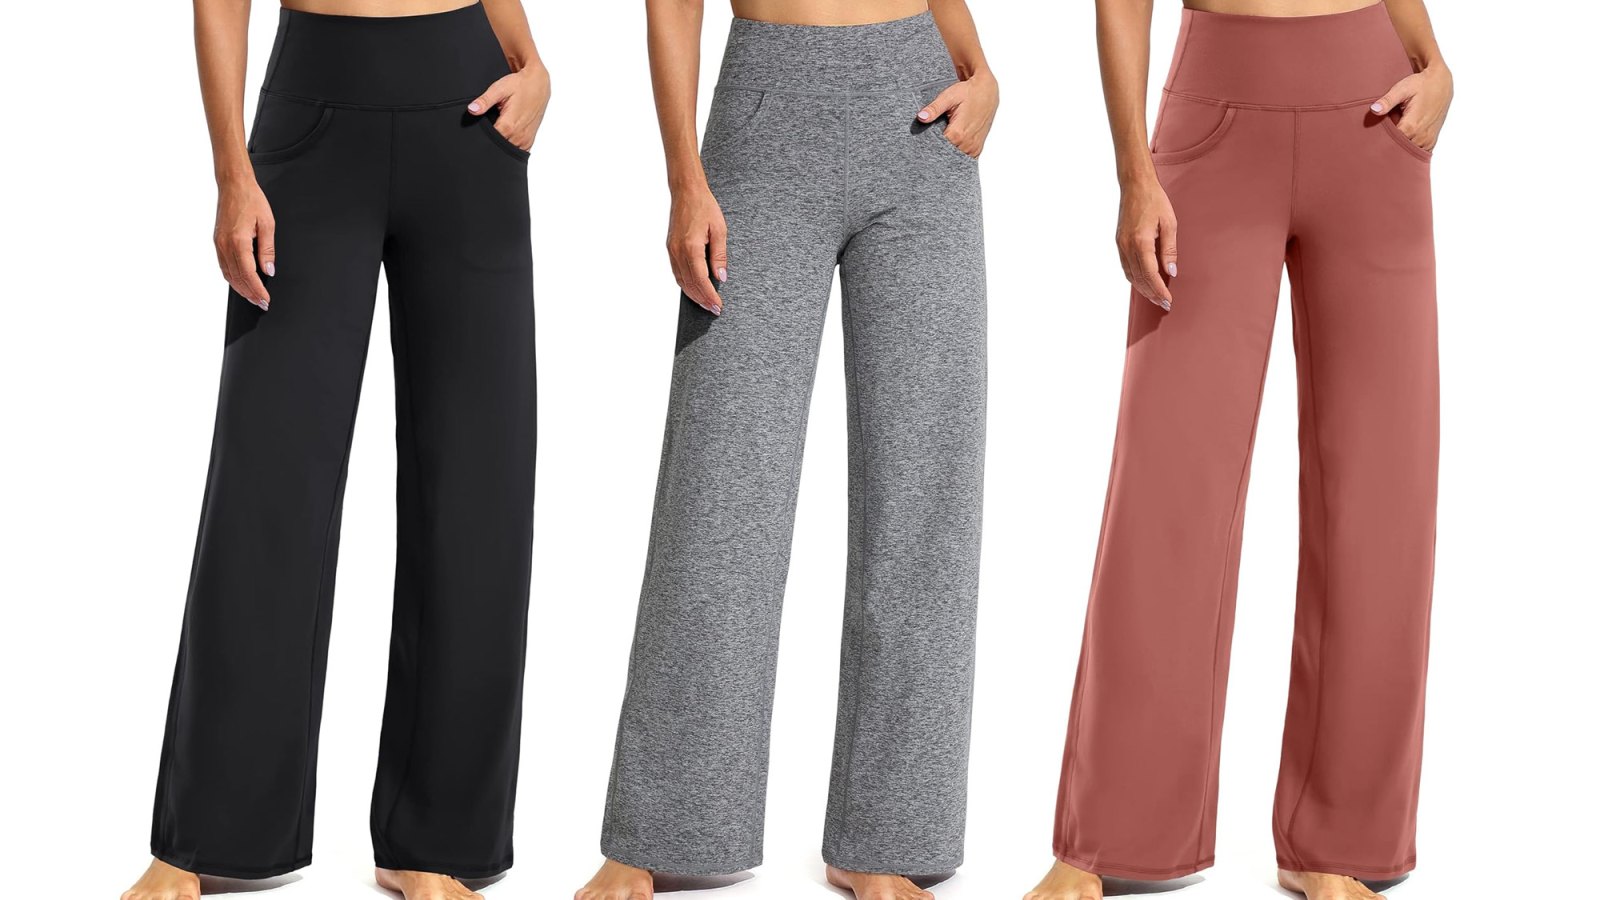 I Bought 4 More Pairs of These Comfy and Slimming Yoga Pants